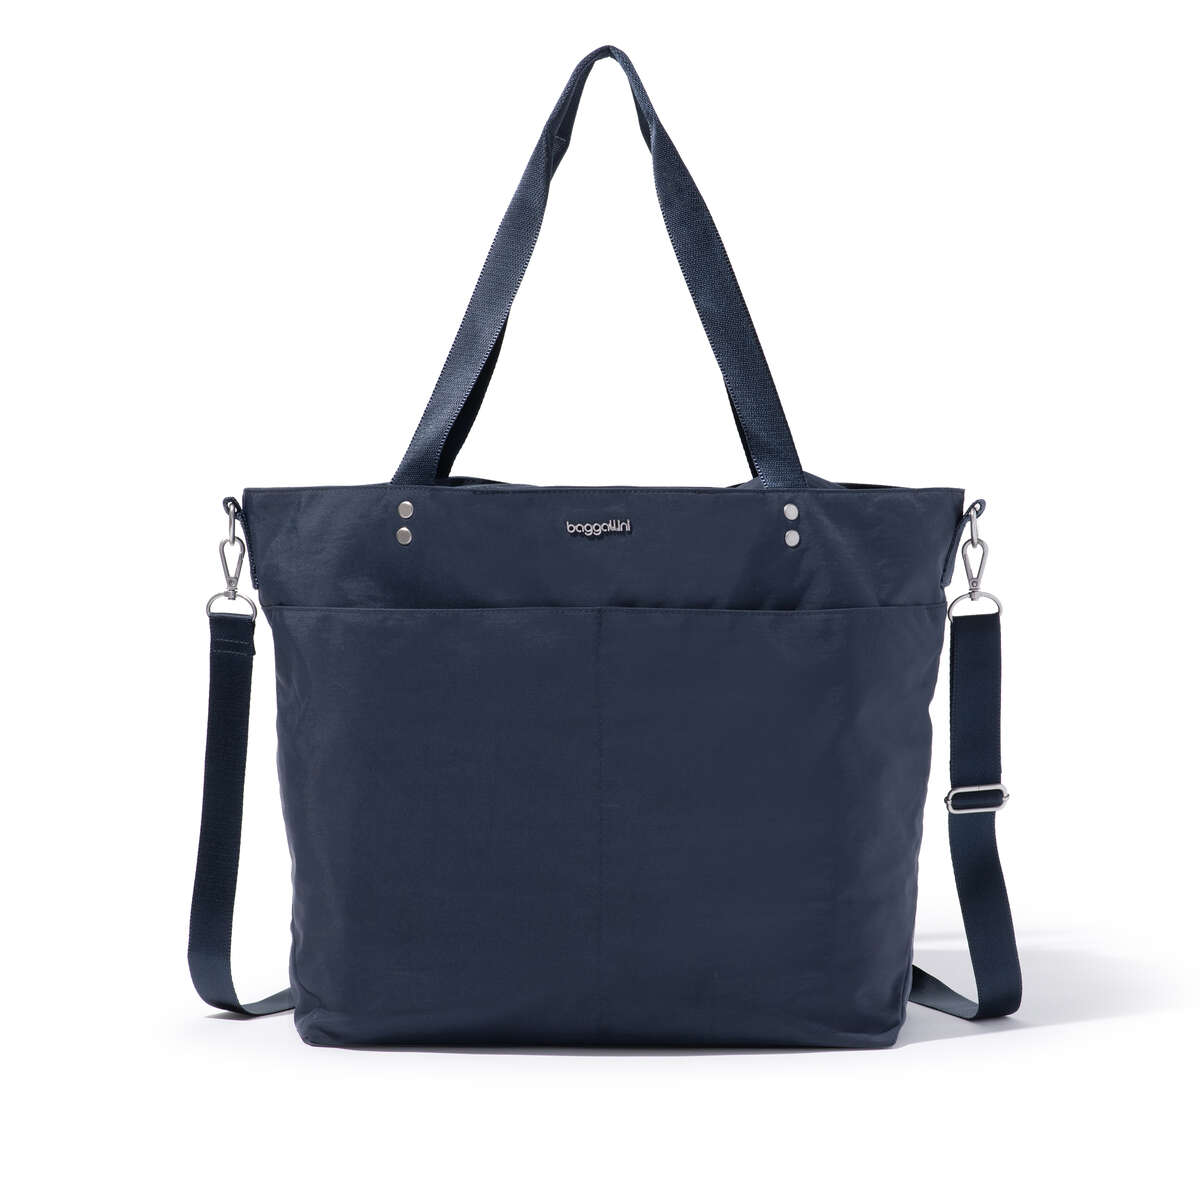 Baggallini Carryall Expandable Packable Tote Bag